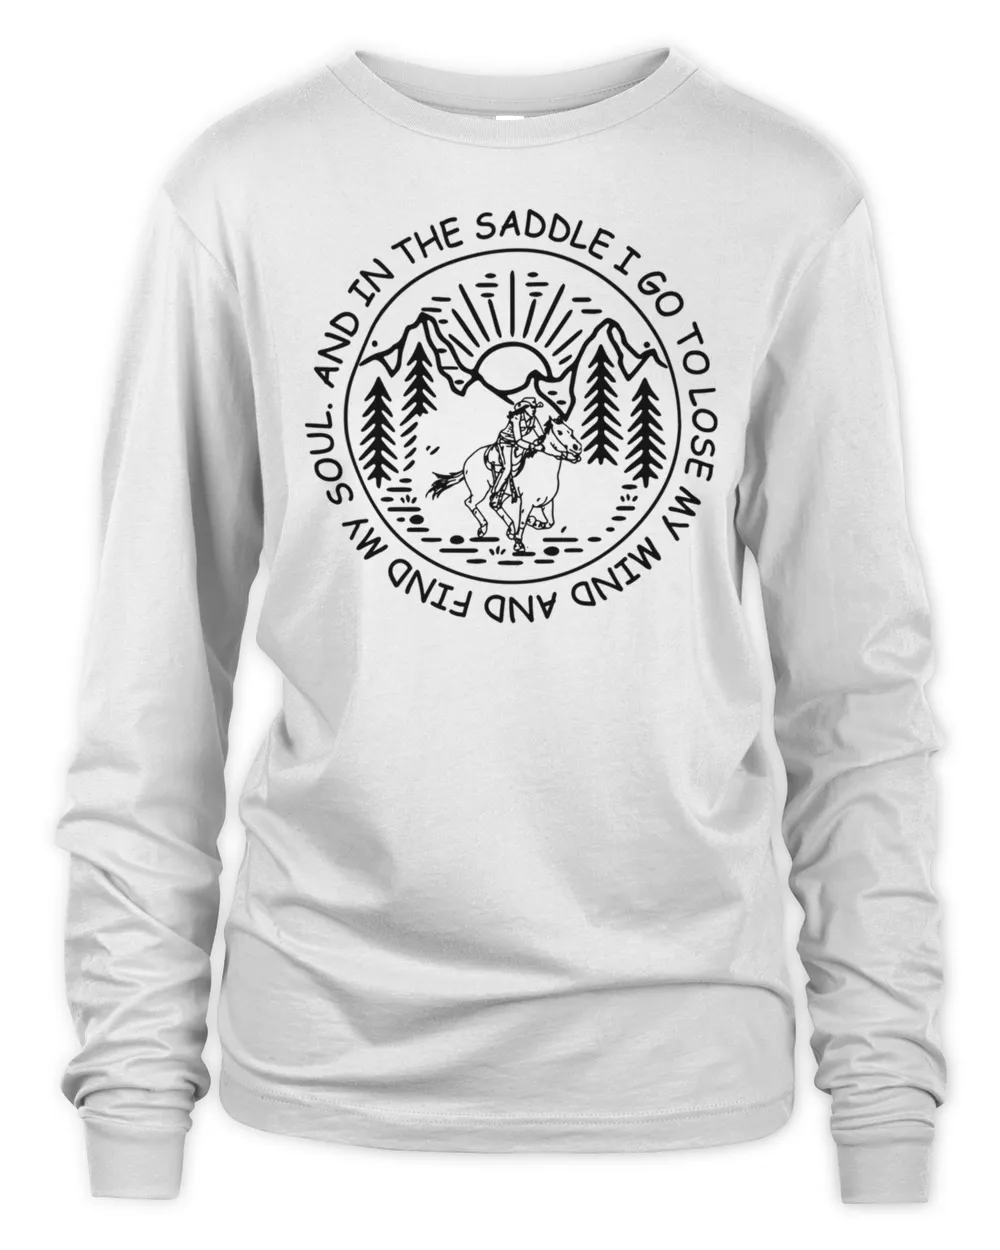 Ride a horse And Into The Saddle I Go to lose my mind and find my soul T-Shirt